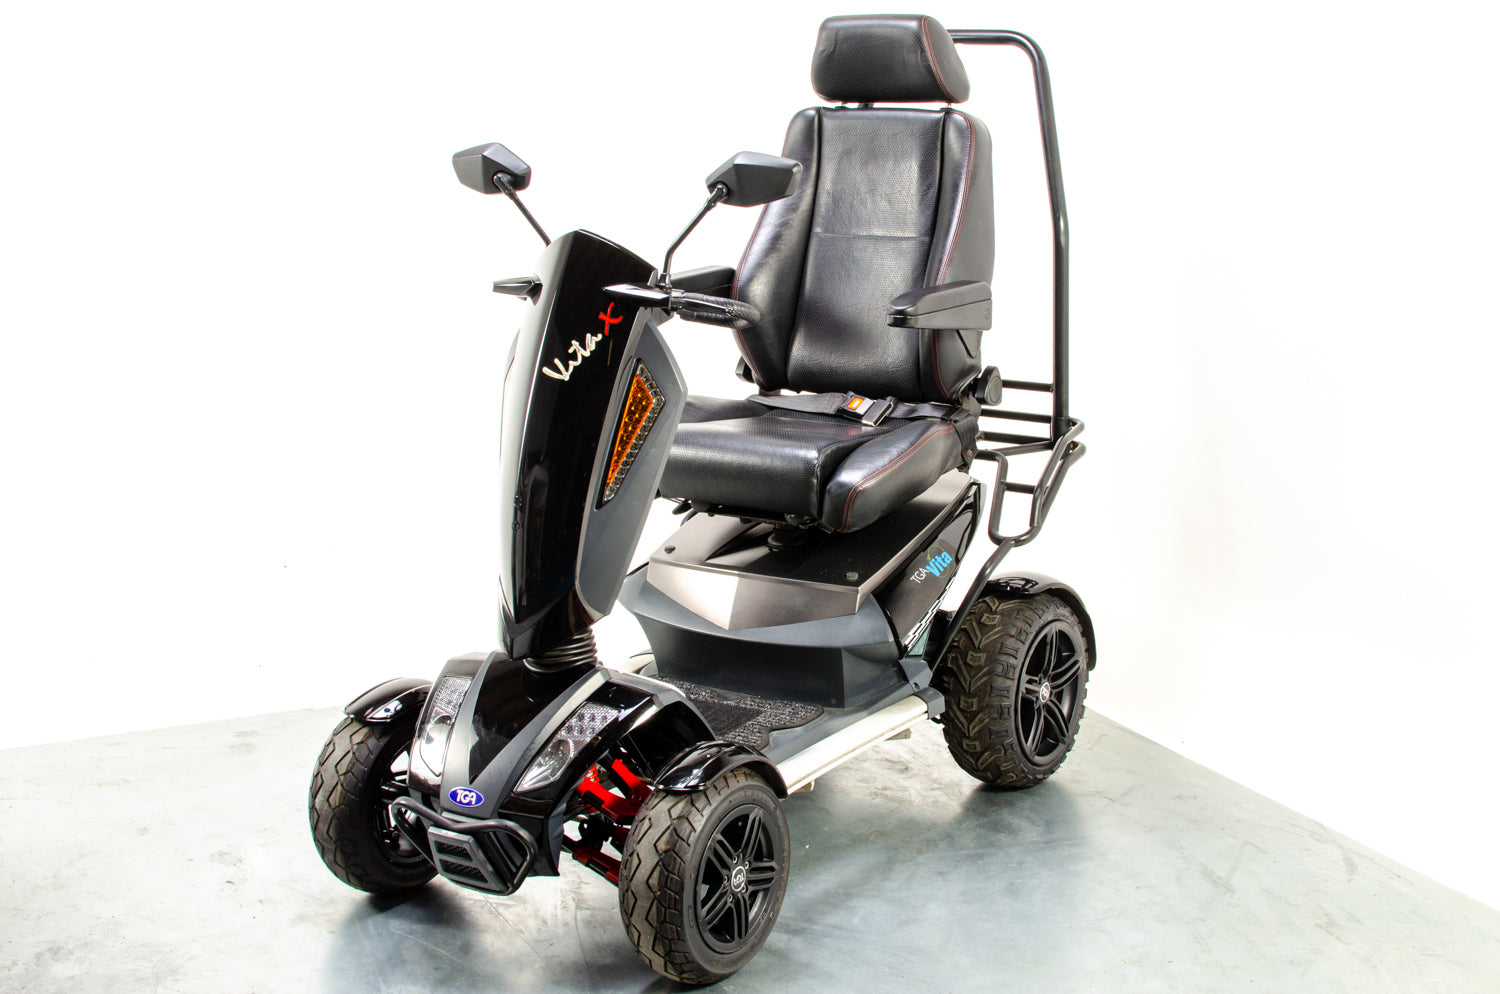 TGA Vita X Used Mobility Scooter 8mph All-Terrain Off-Road Large Road Legal